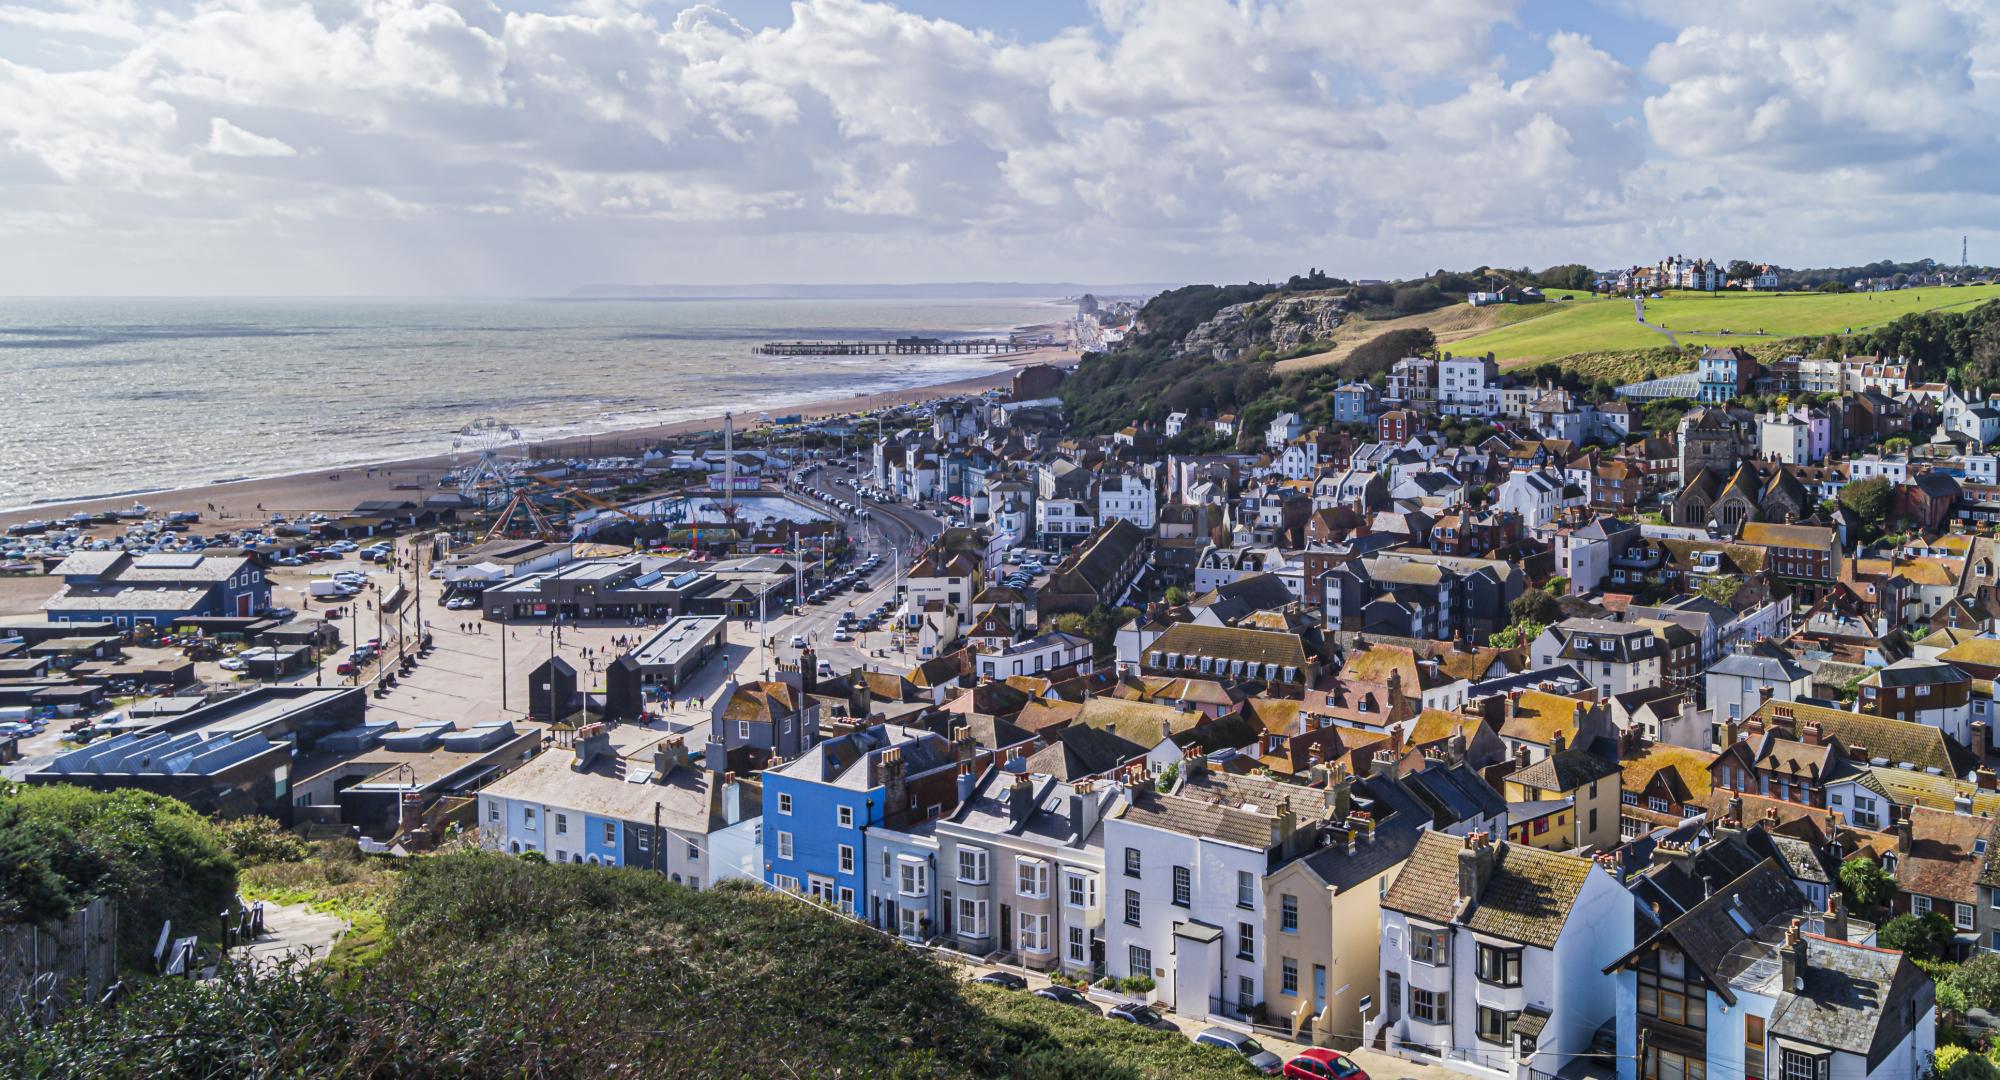 A view of Hastings Old Town taken from the East Hill.